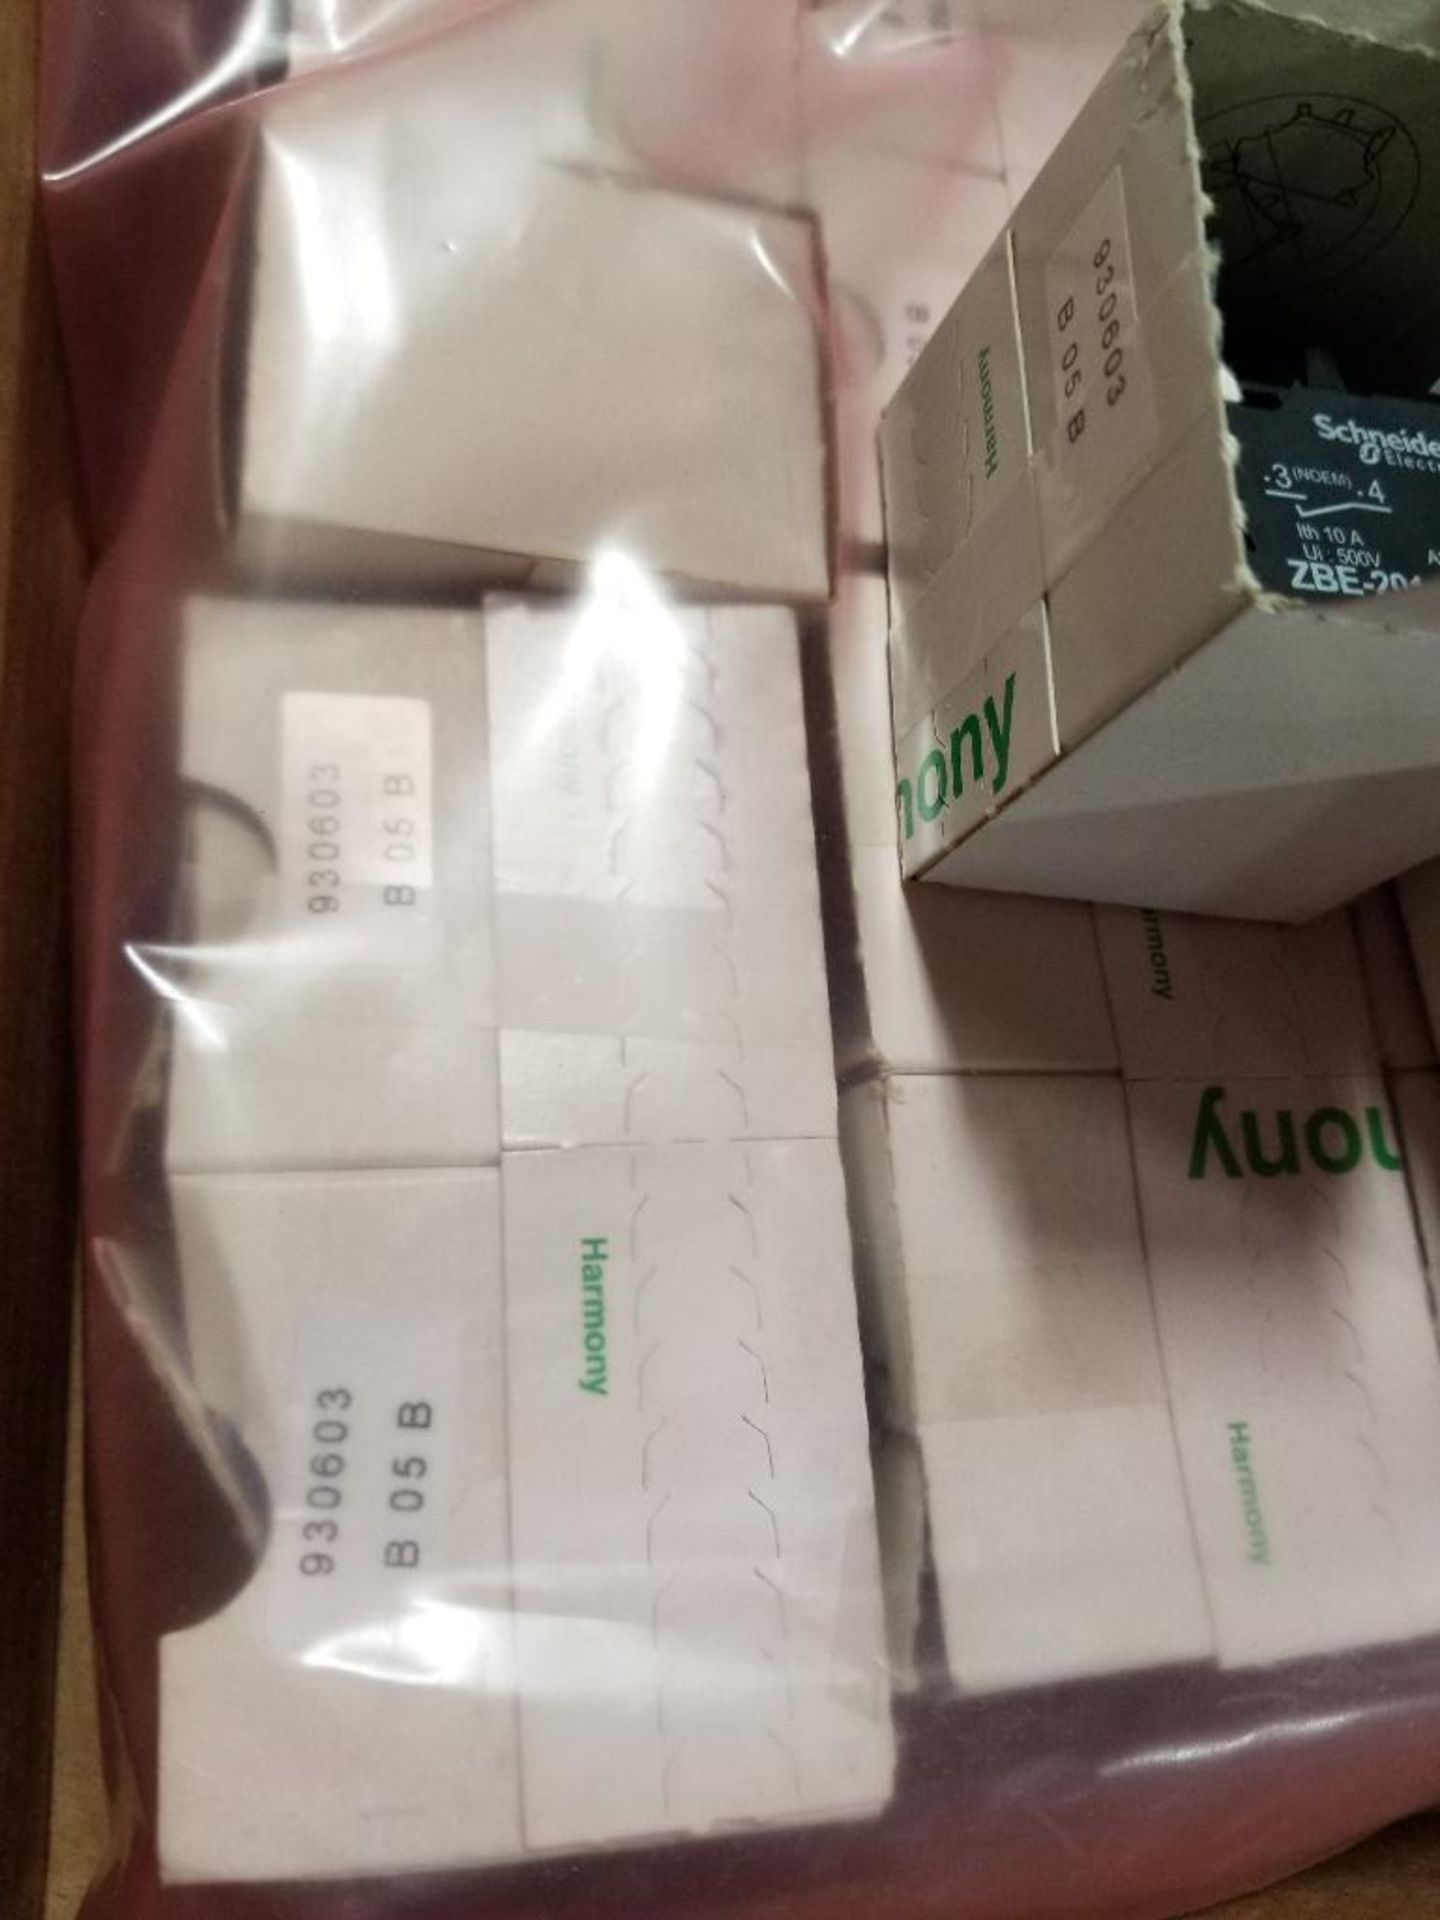 Qty 80 - Schneider electric. Part number 017744. New in bulk box. - Image 3 of 3